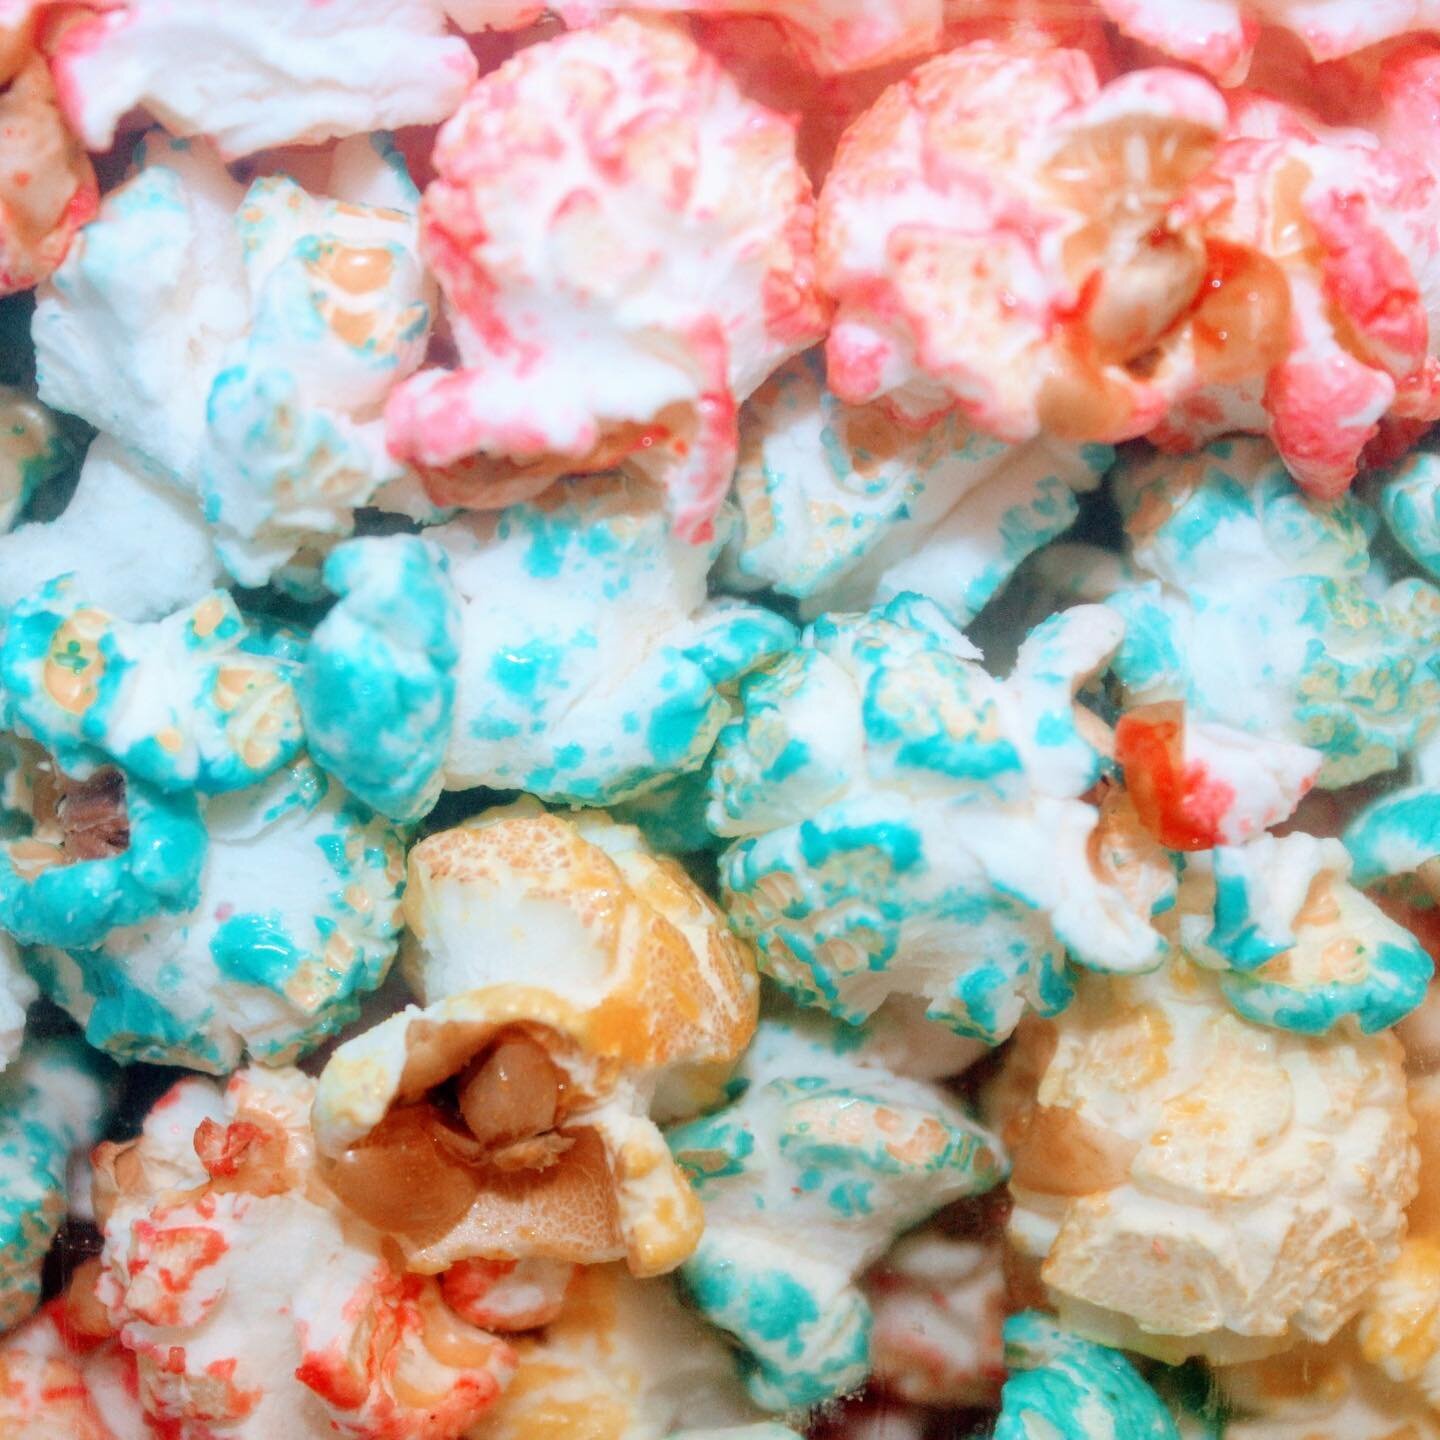 Vanilla pink, raspberry blue or banana yellow popcorn now available. Great for parties baby showers and wedding favours. Come see us at www.empirepopcorn.co.uk for free delivery on all products this month #ukfoodie #popcorn #ukwedding #weddingfavours